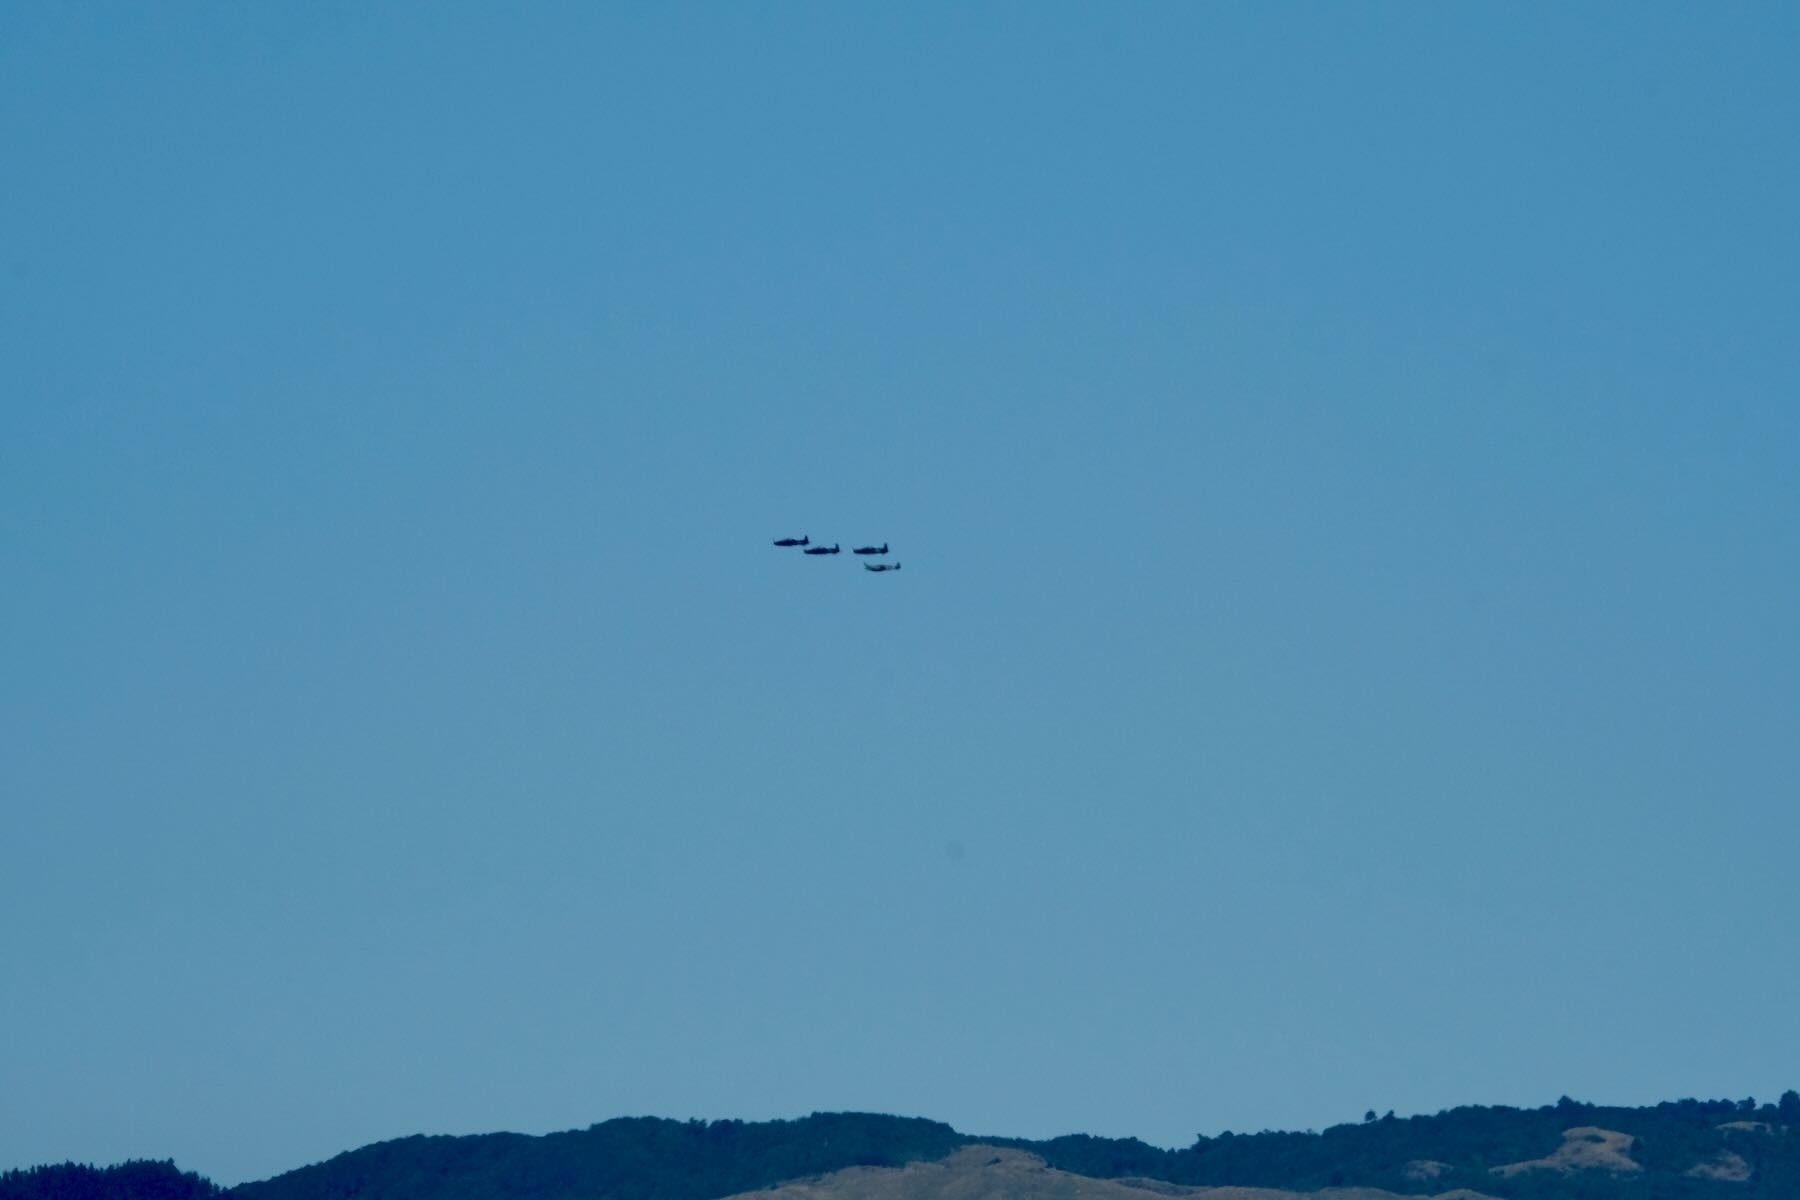 4 distant propeller planes in formation. 